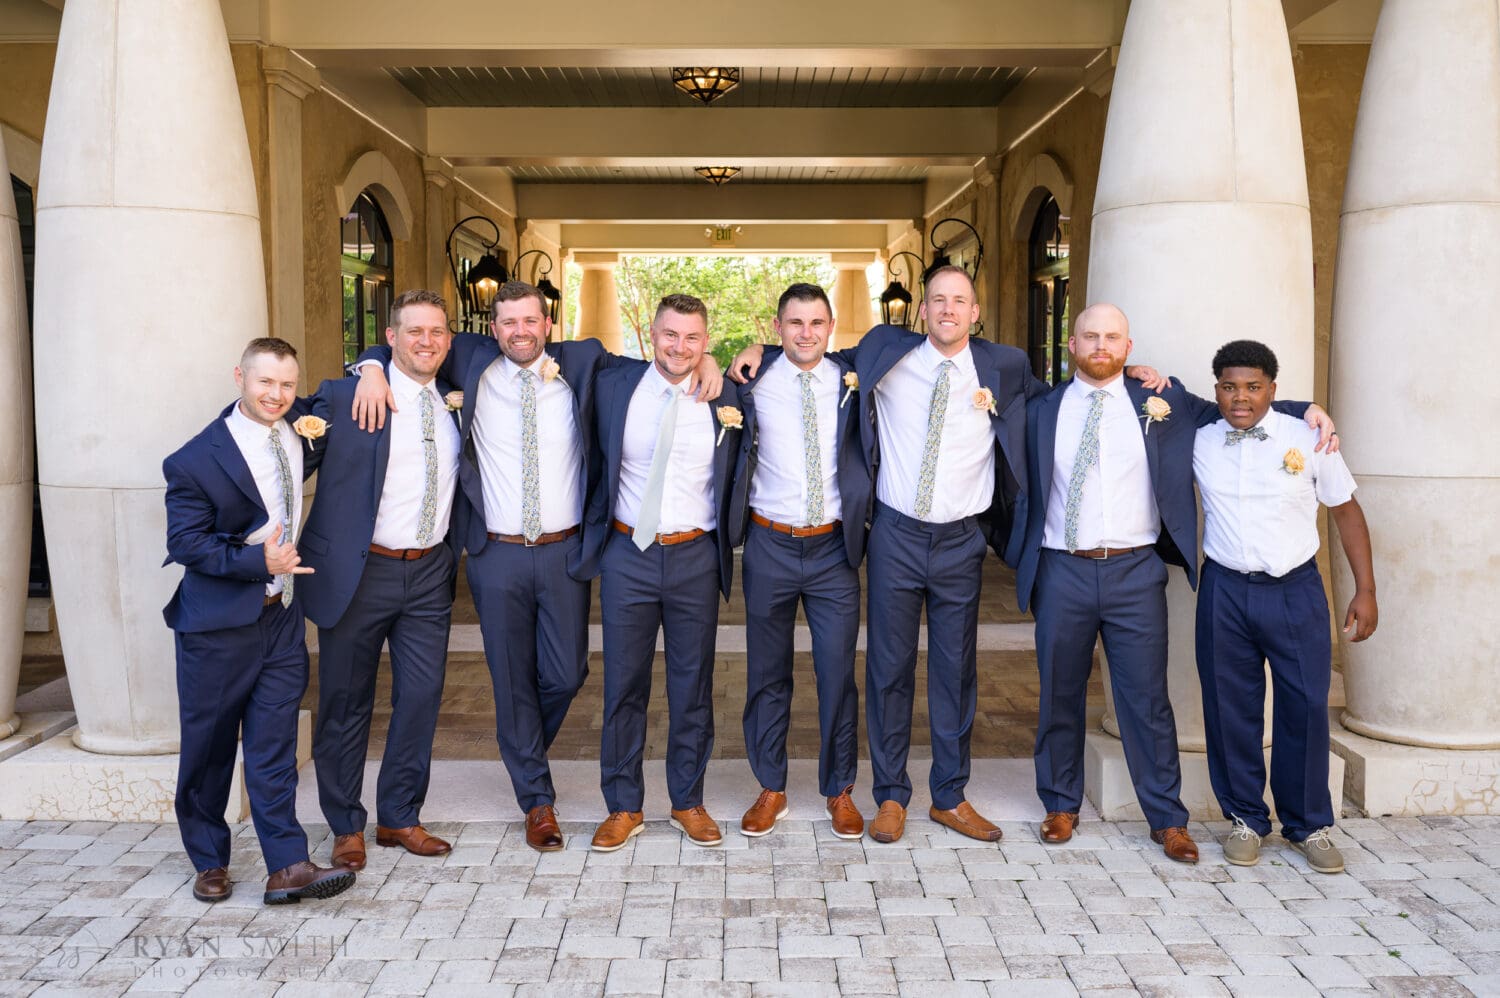 Casual picture with the groomsmen - 21 Main Events